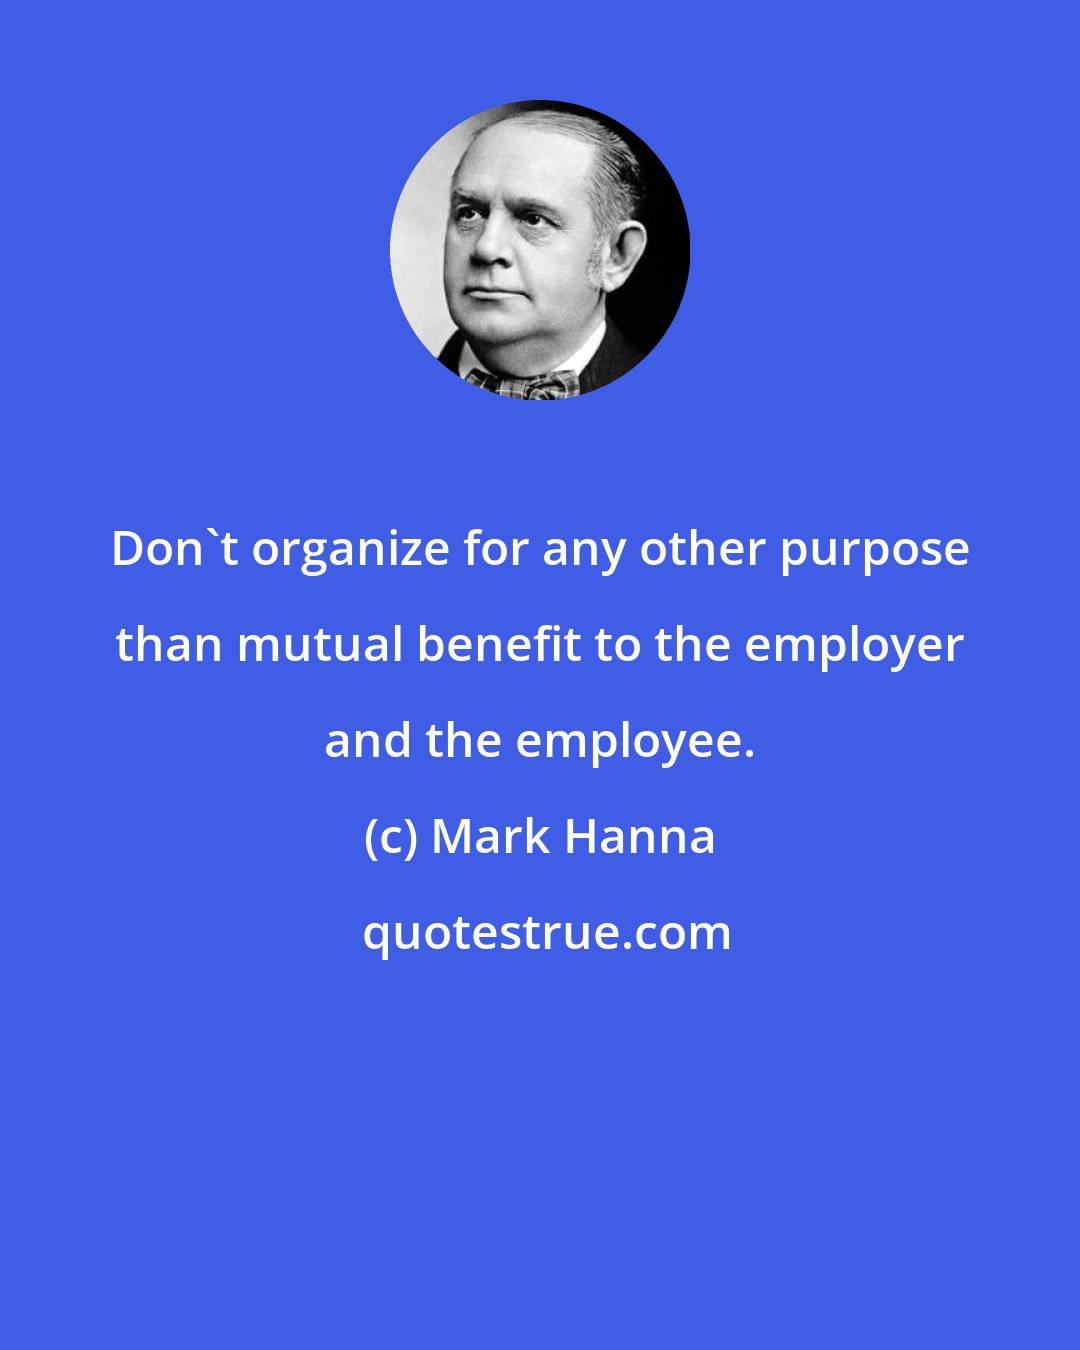 Mark Hanna: Don't organize for any other purpose than mutual benefit to the employer and the employee.